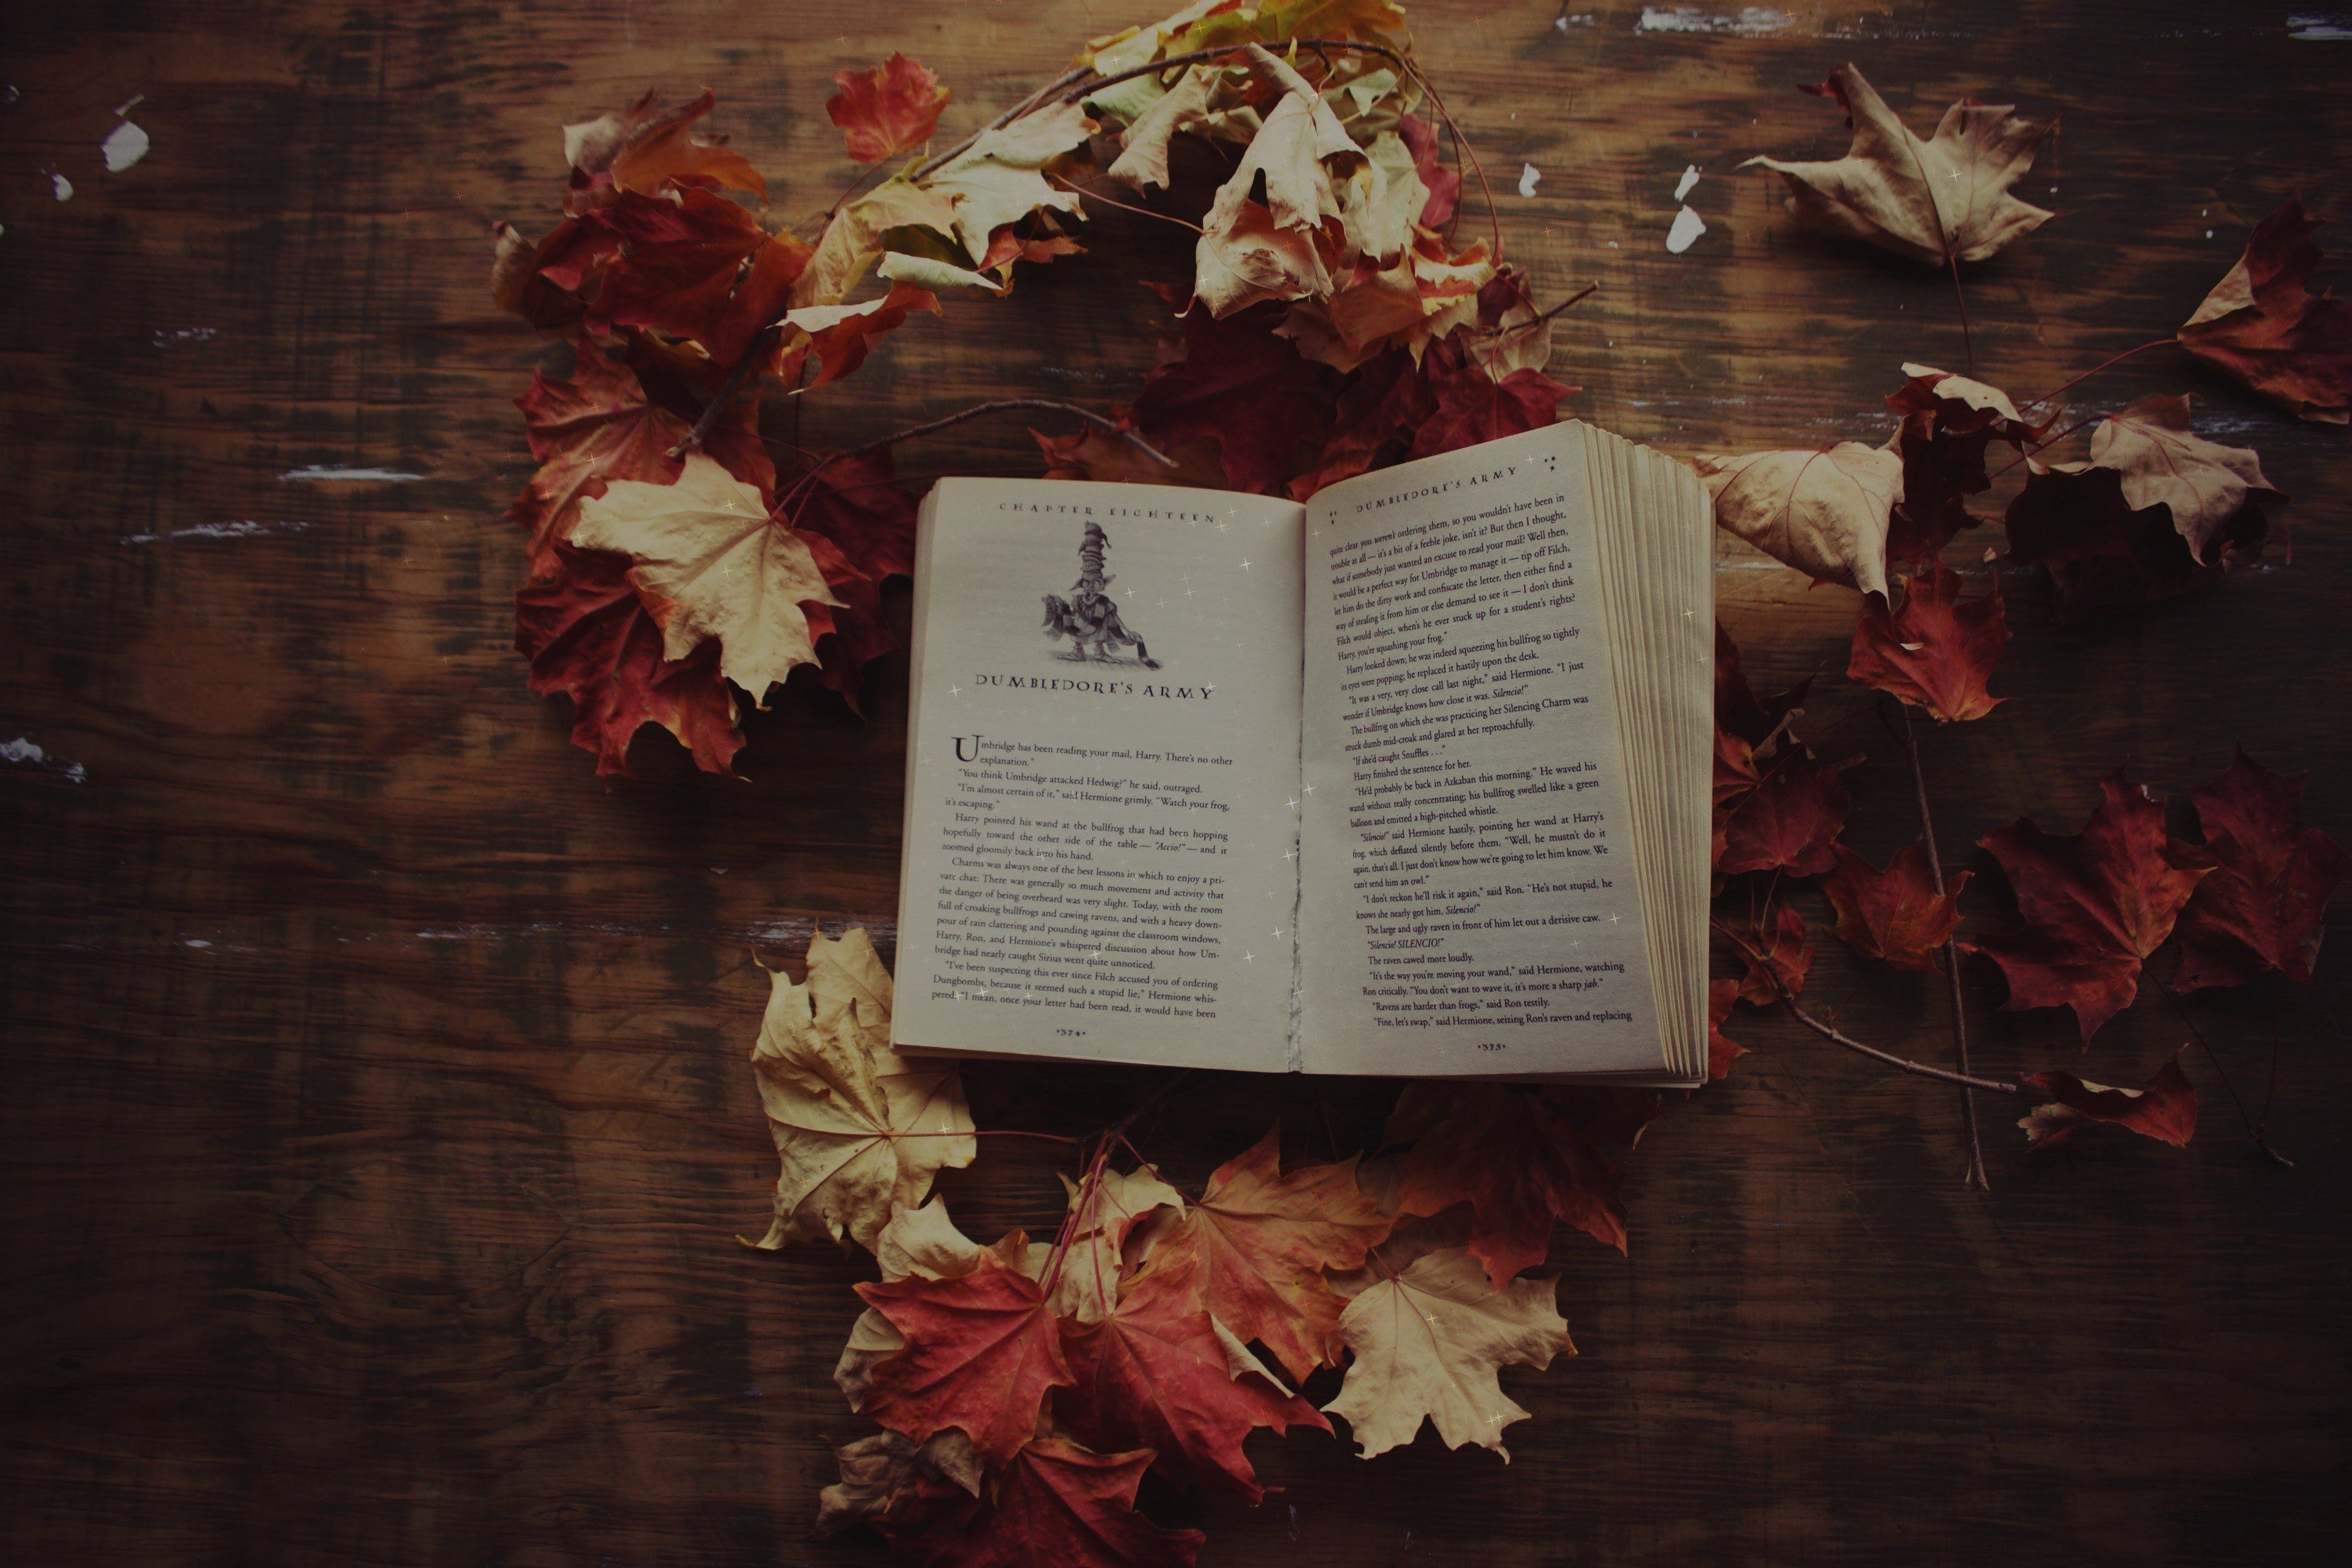 A book is laying on the ground with leaves - Harry Potter